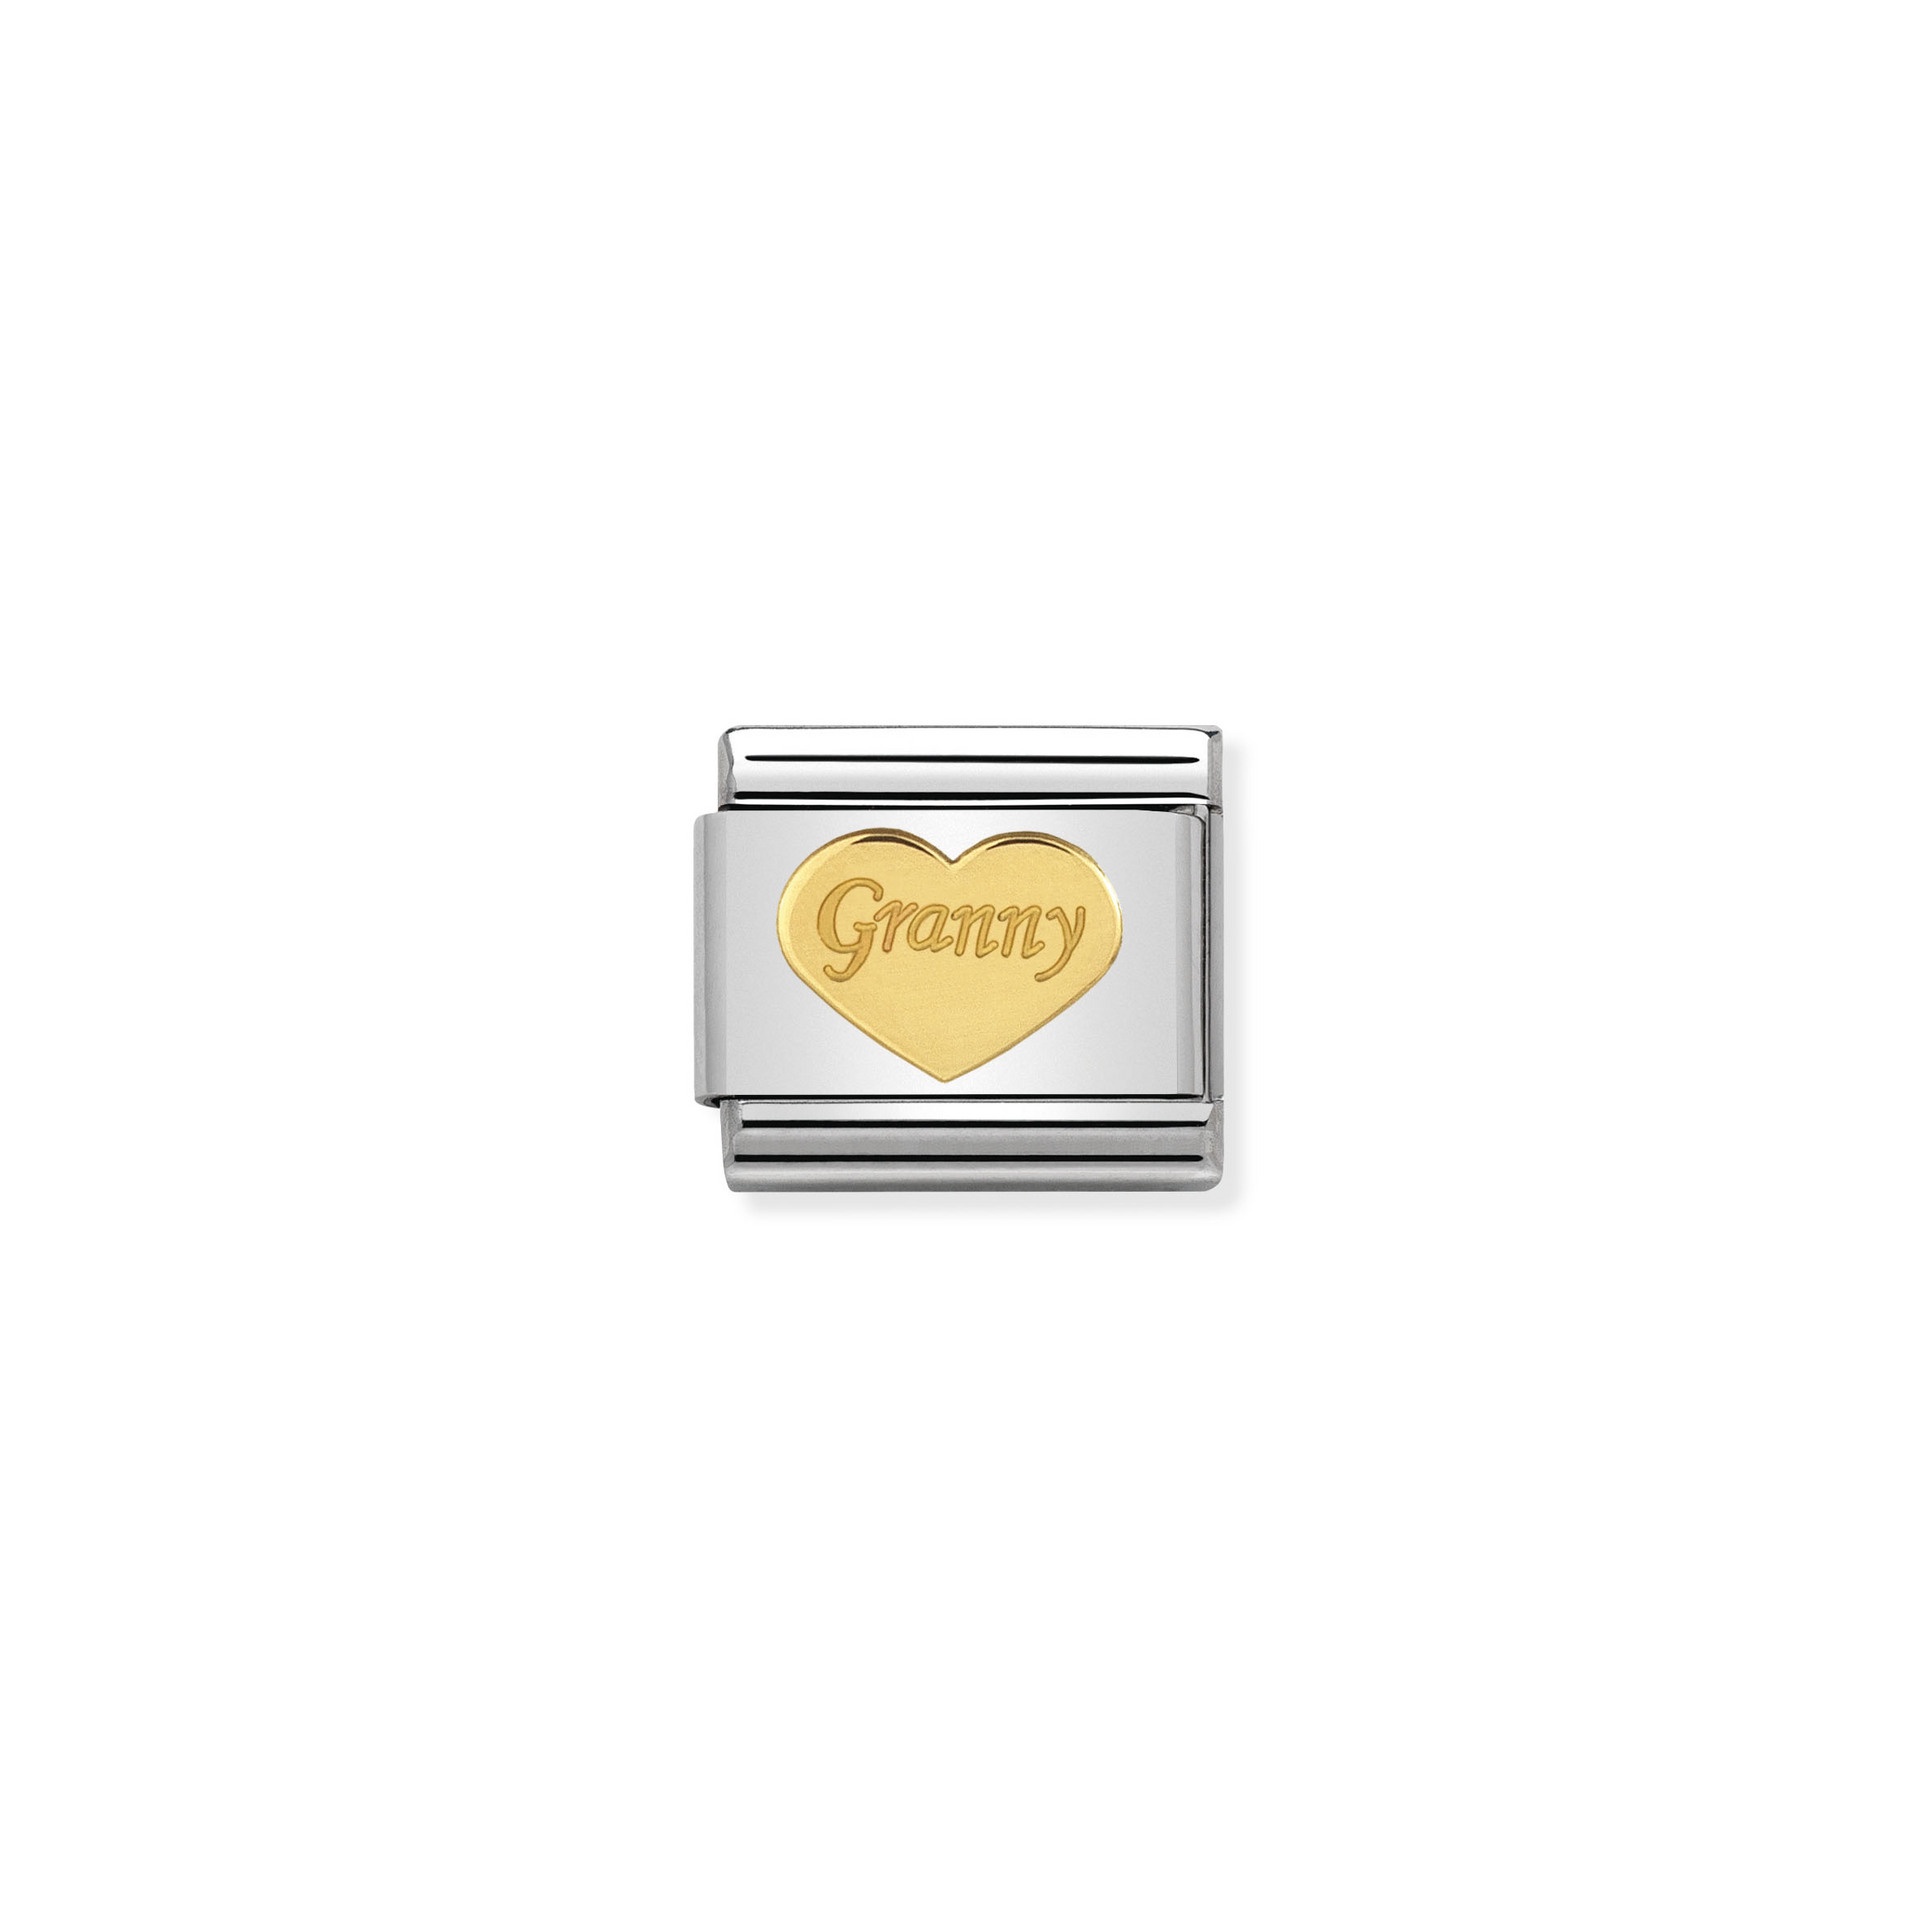 Nomination Composable Classic gold granny heart charm - 030162_39